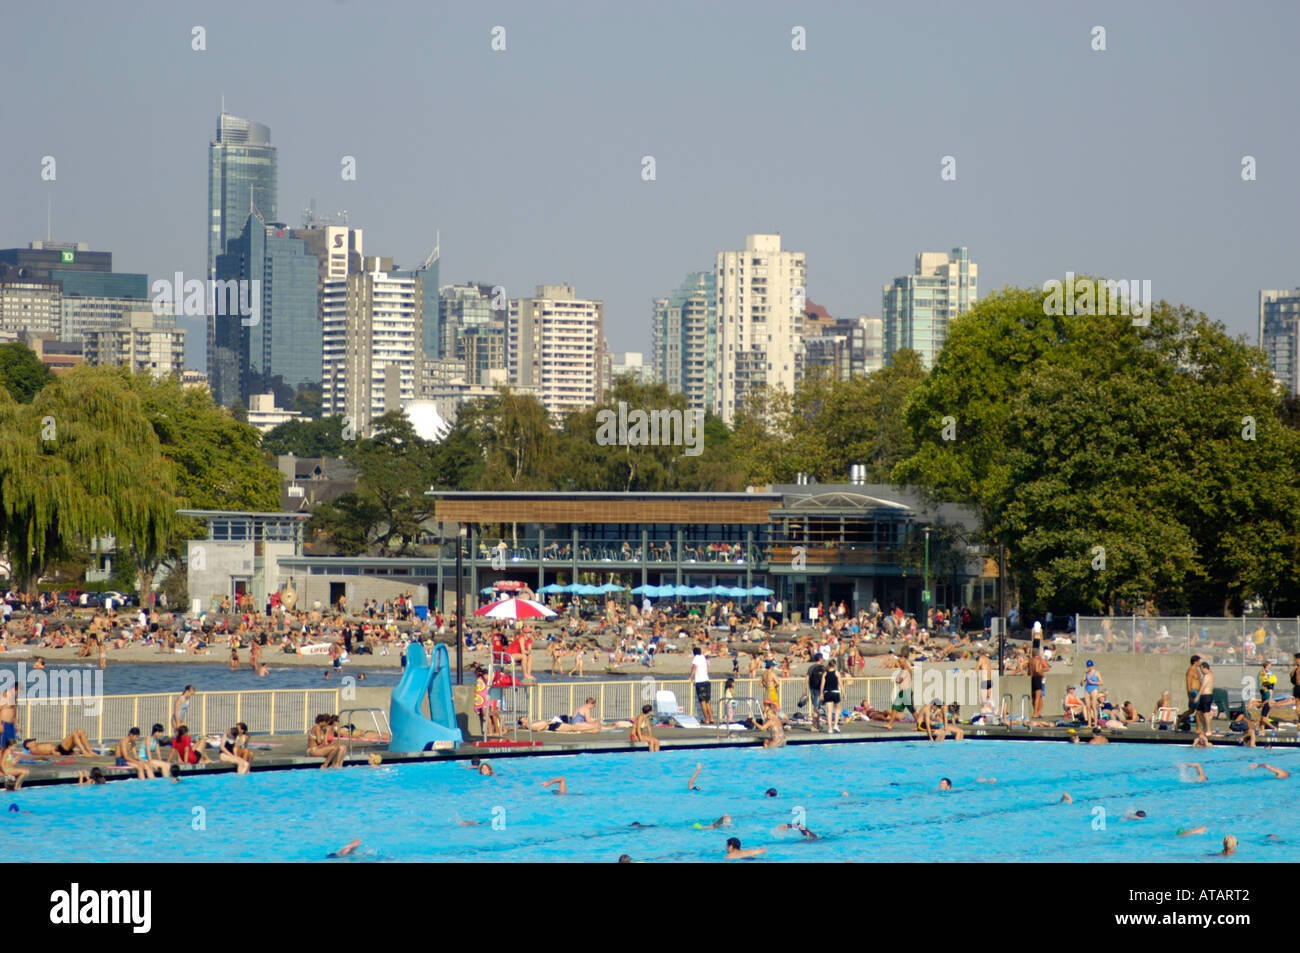 Kitsilano Pool Canada s longest swimming pool at 137 metres is backdropped by downtown Vancouver BC Canada Stock Photo